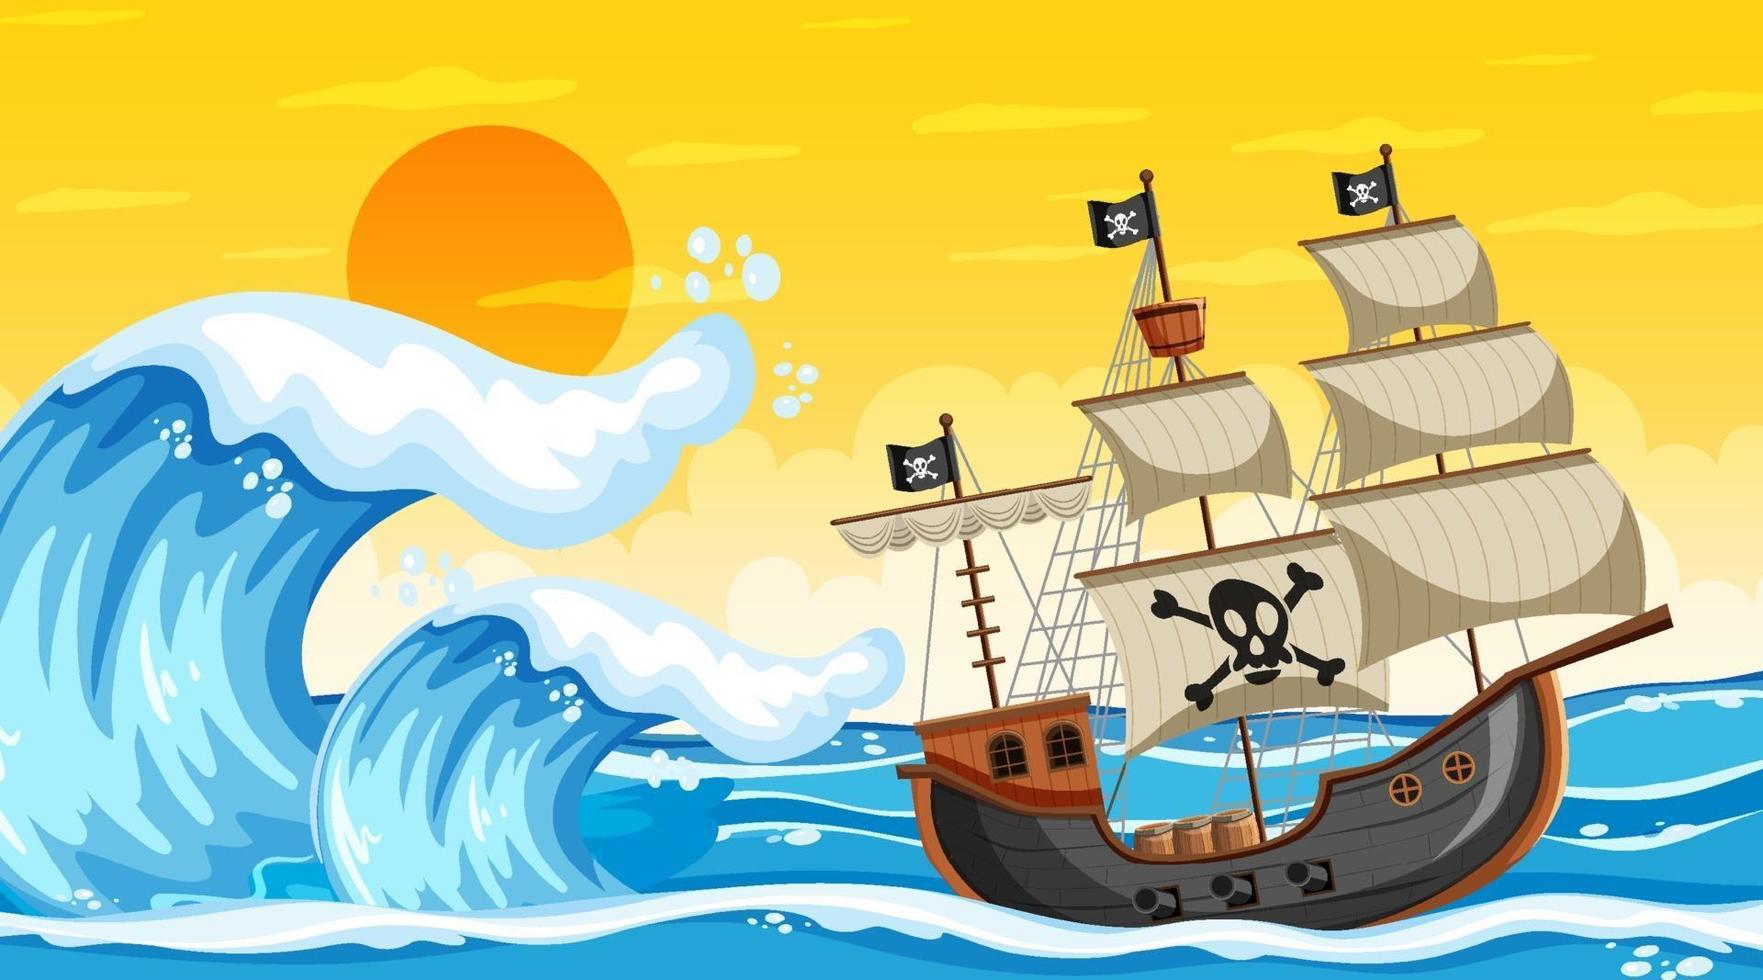 Ocean scene at sunset time with Pirate ship in cartoon style vector